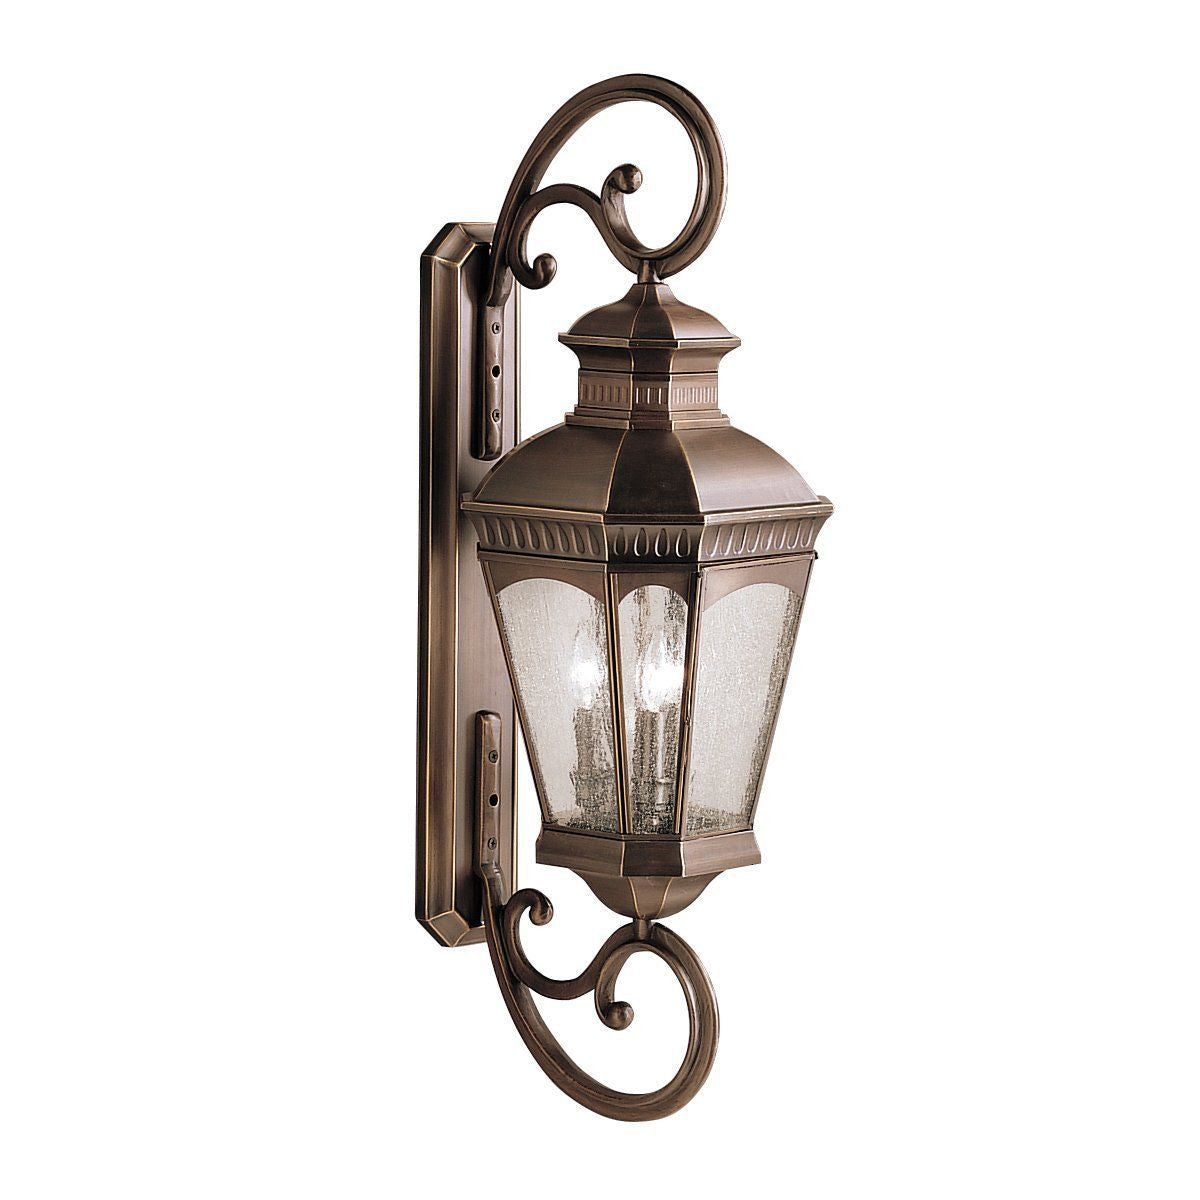 Aztec 39911 By Kichler Lighting Elgin Collection Three Light Outdoor Wall Lantern in Burnished Bronze Finish